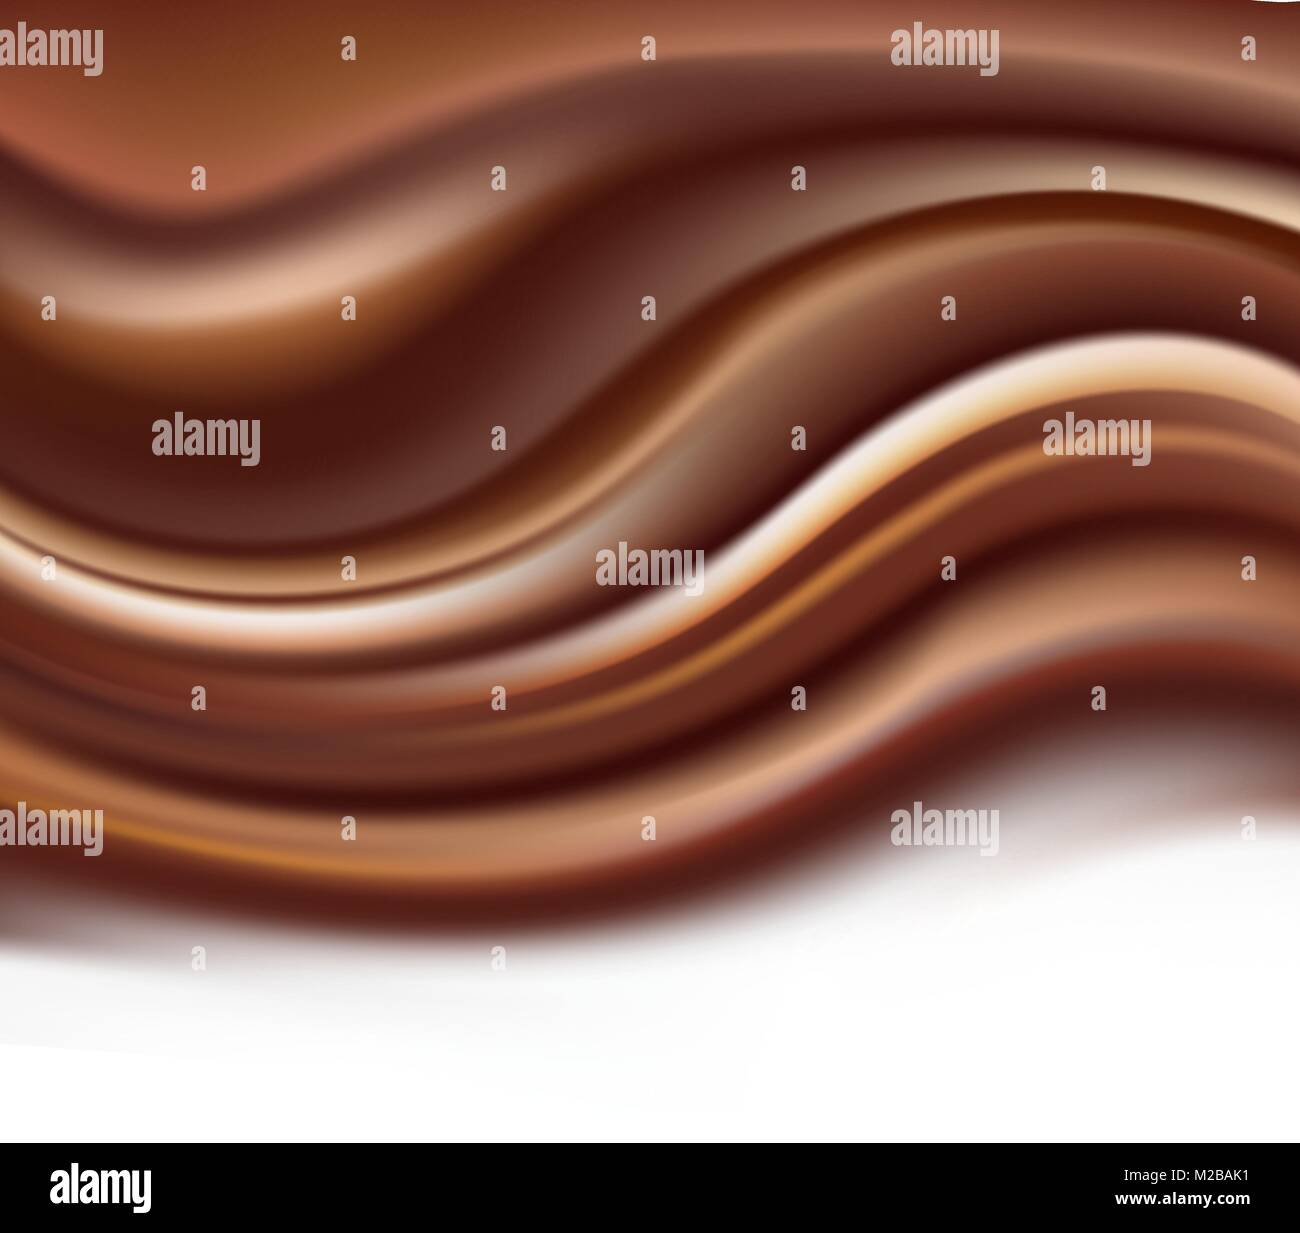 chocolate creamy background with soft brown wavy ripples Stock Vector